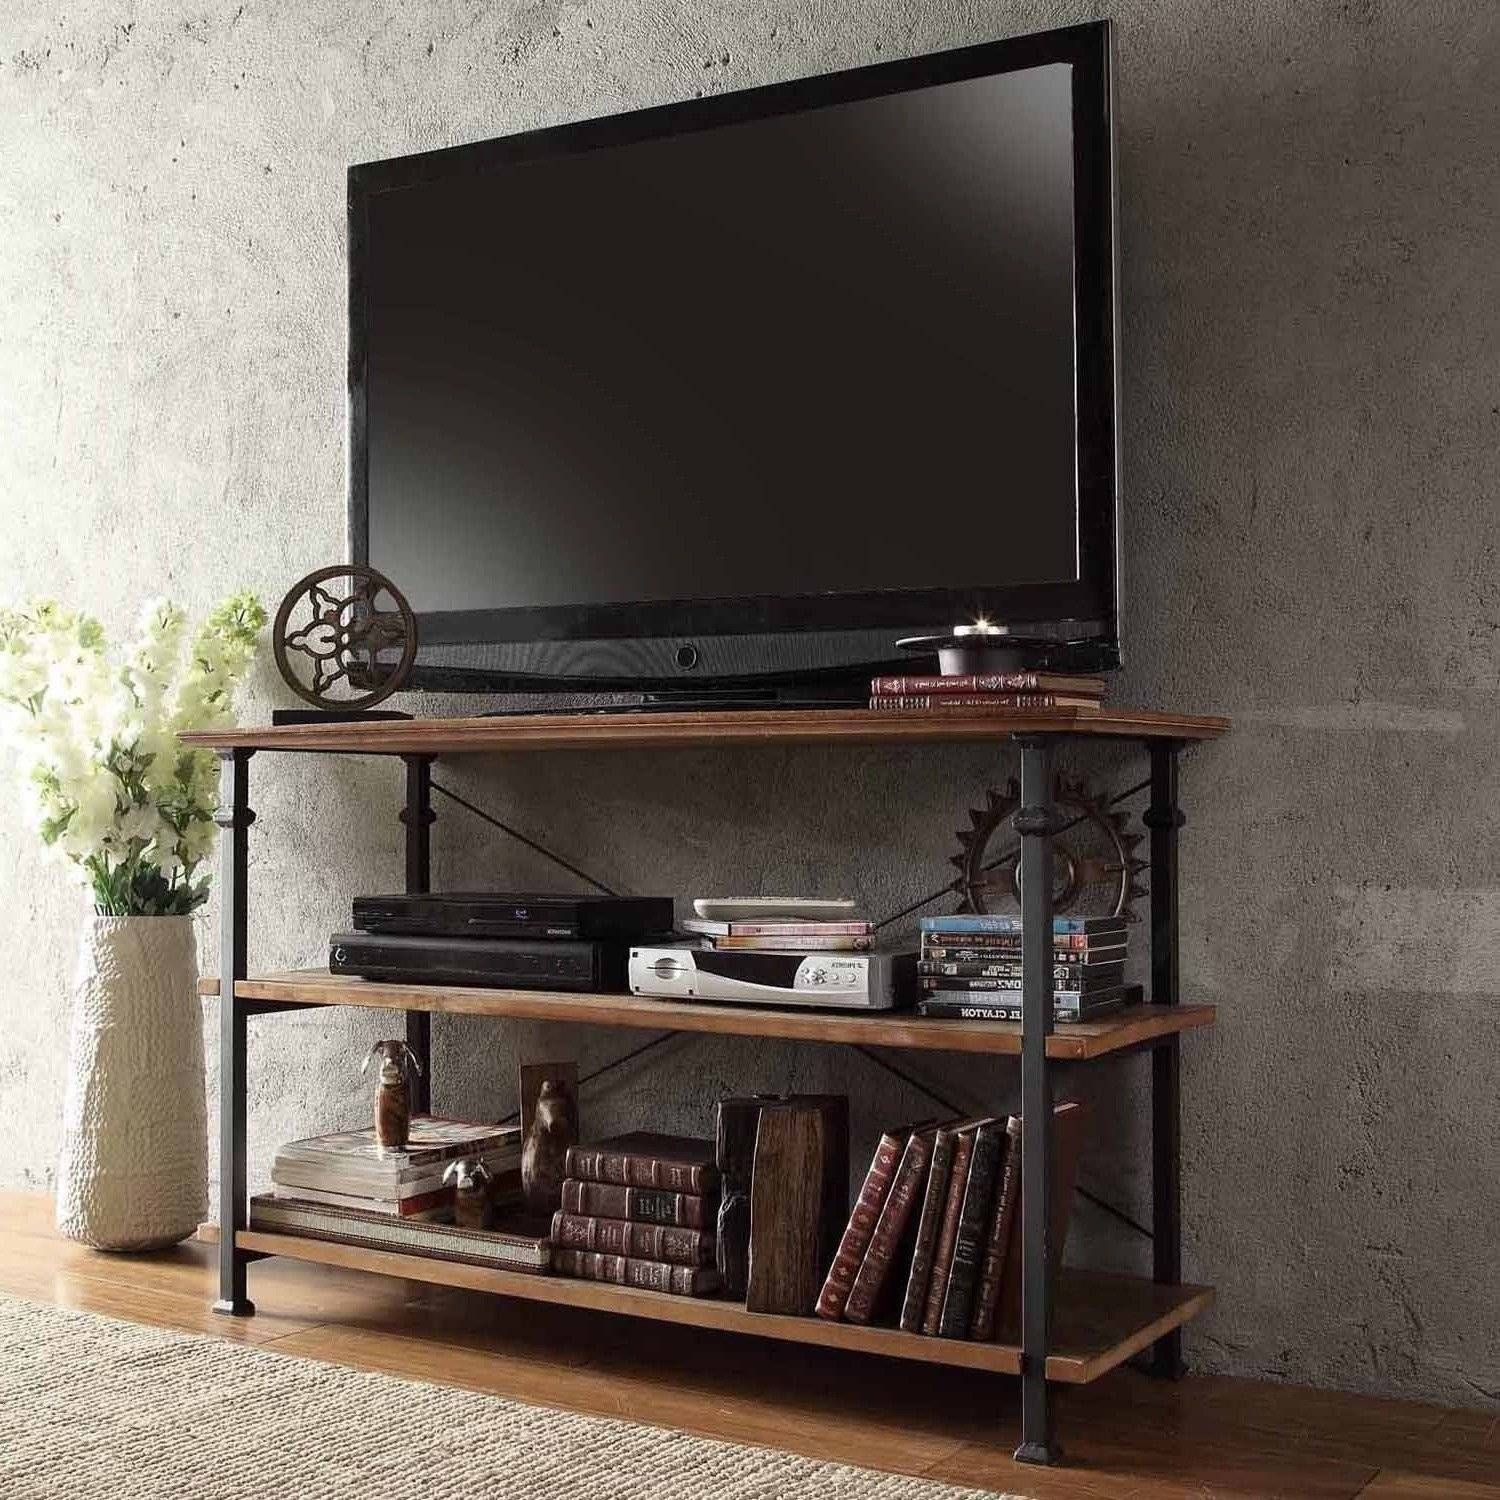 Furniture & Rug: Wood Tv 8 Weather App | Solid Wood Tv Stands 60 Pertaining To Rustic 60 Inch Tv Stands (View 10 of 15)